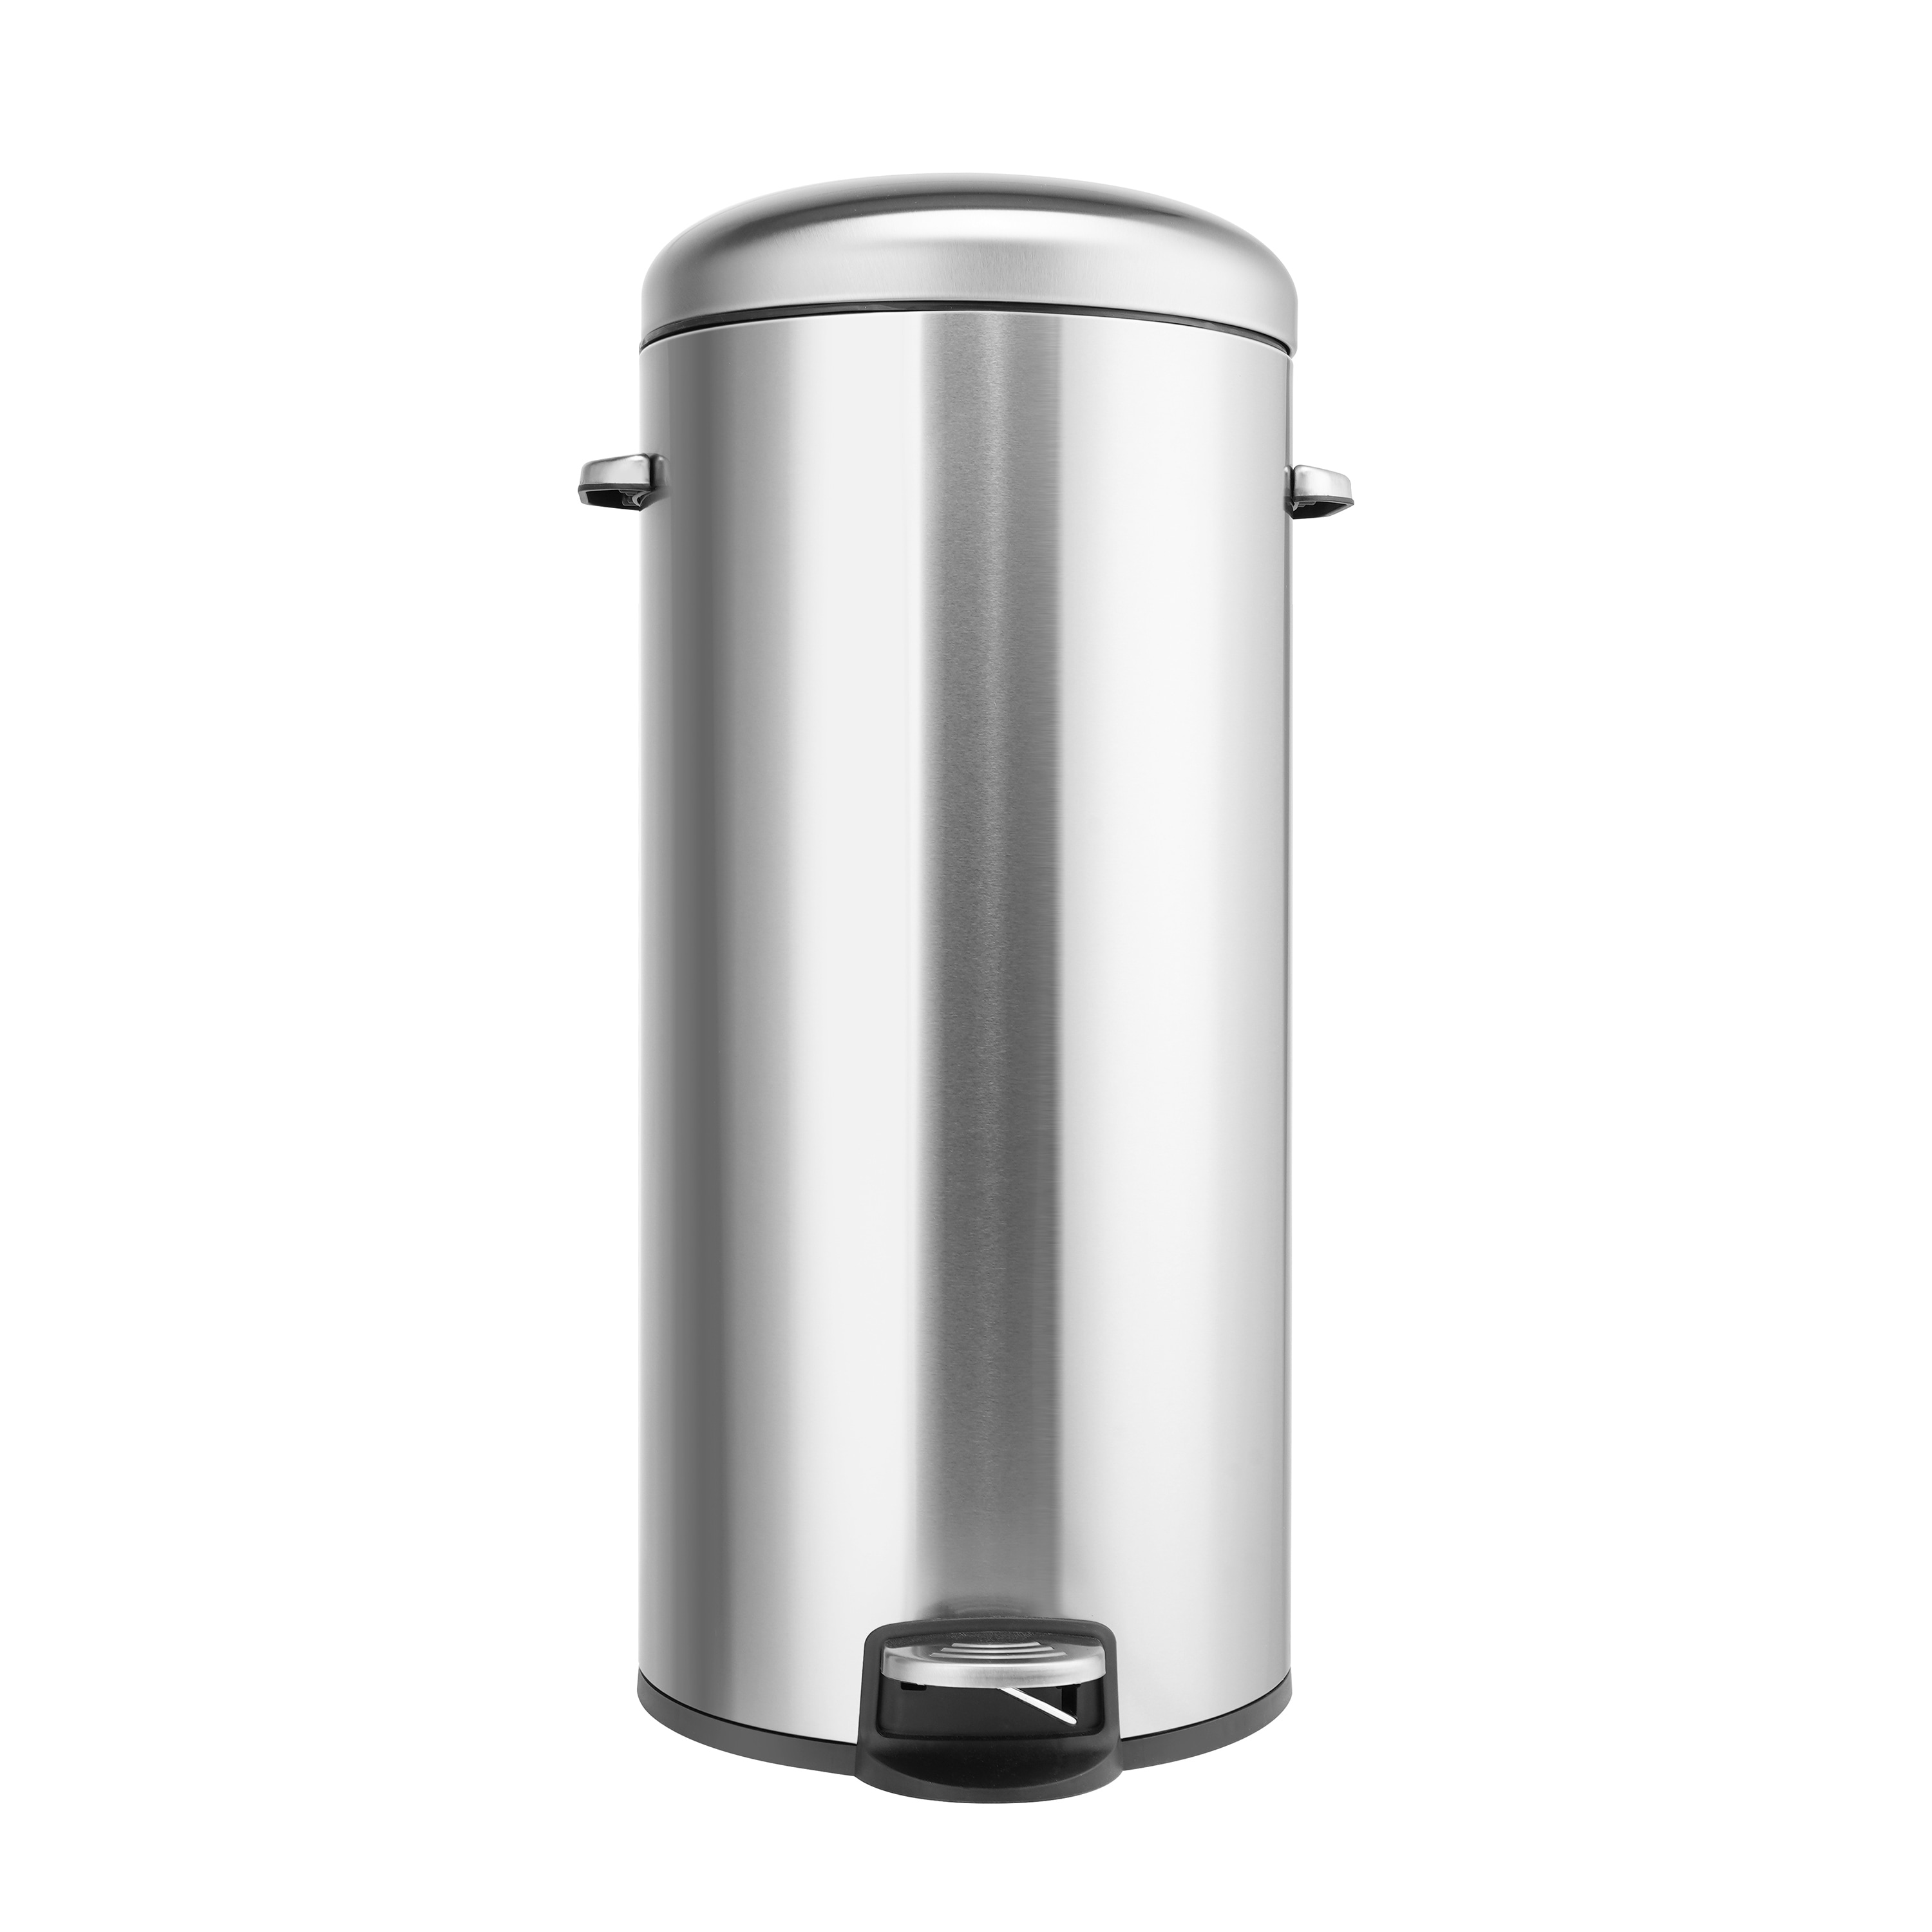 Home Zone Living 1.3 Gallon Bathroom Trash Can, Slim Stainless Steel, Step Pedal, 5 Liter